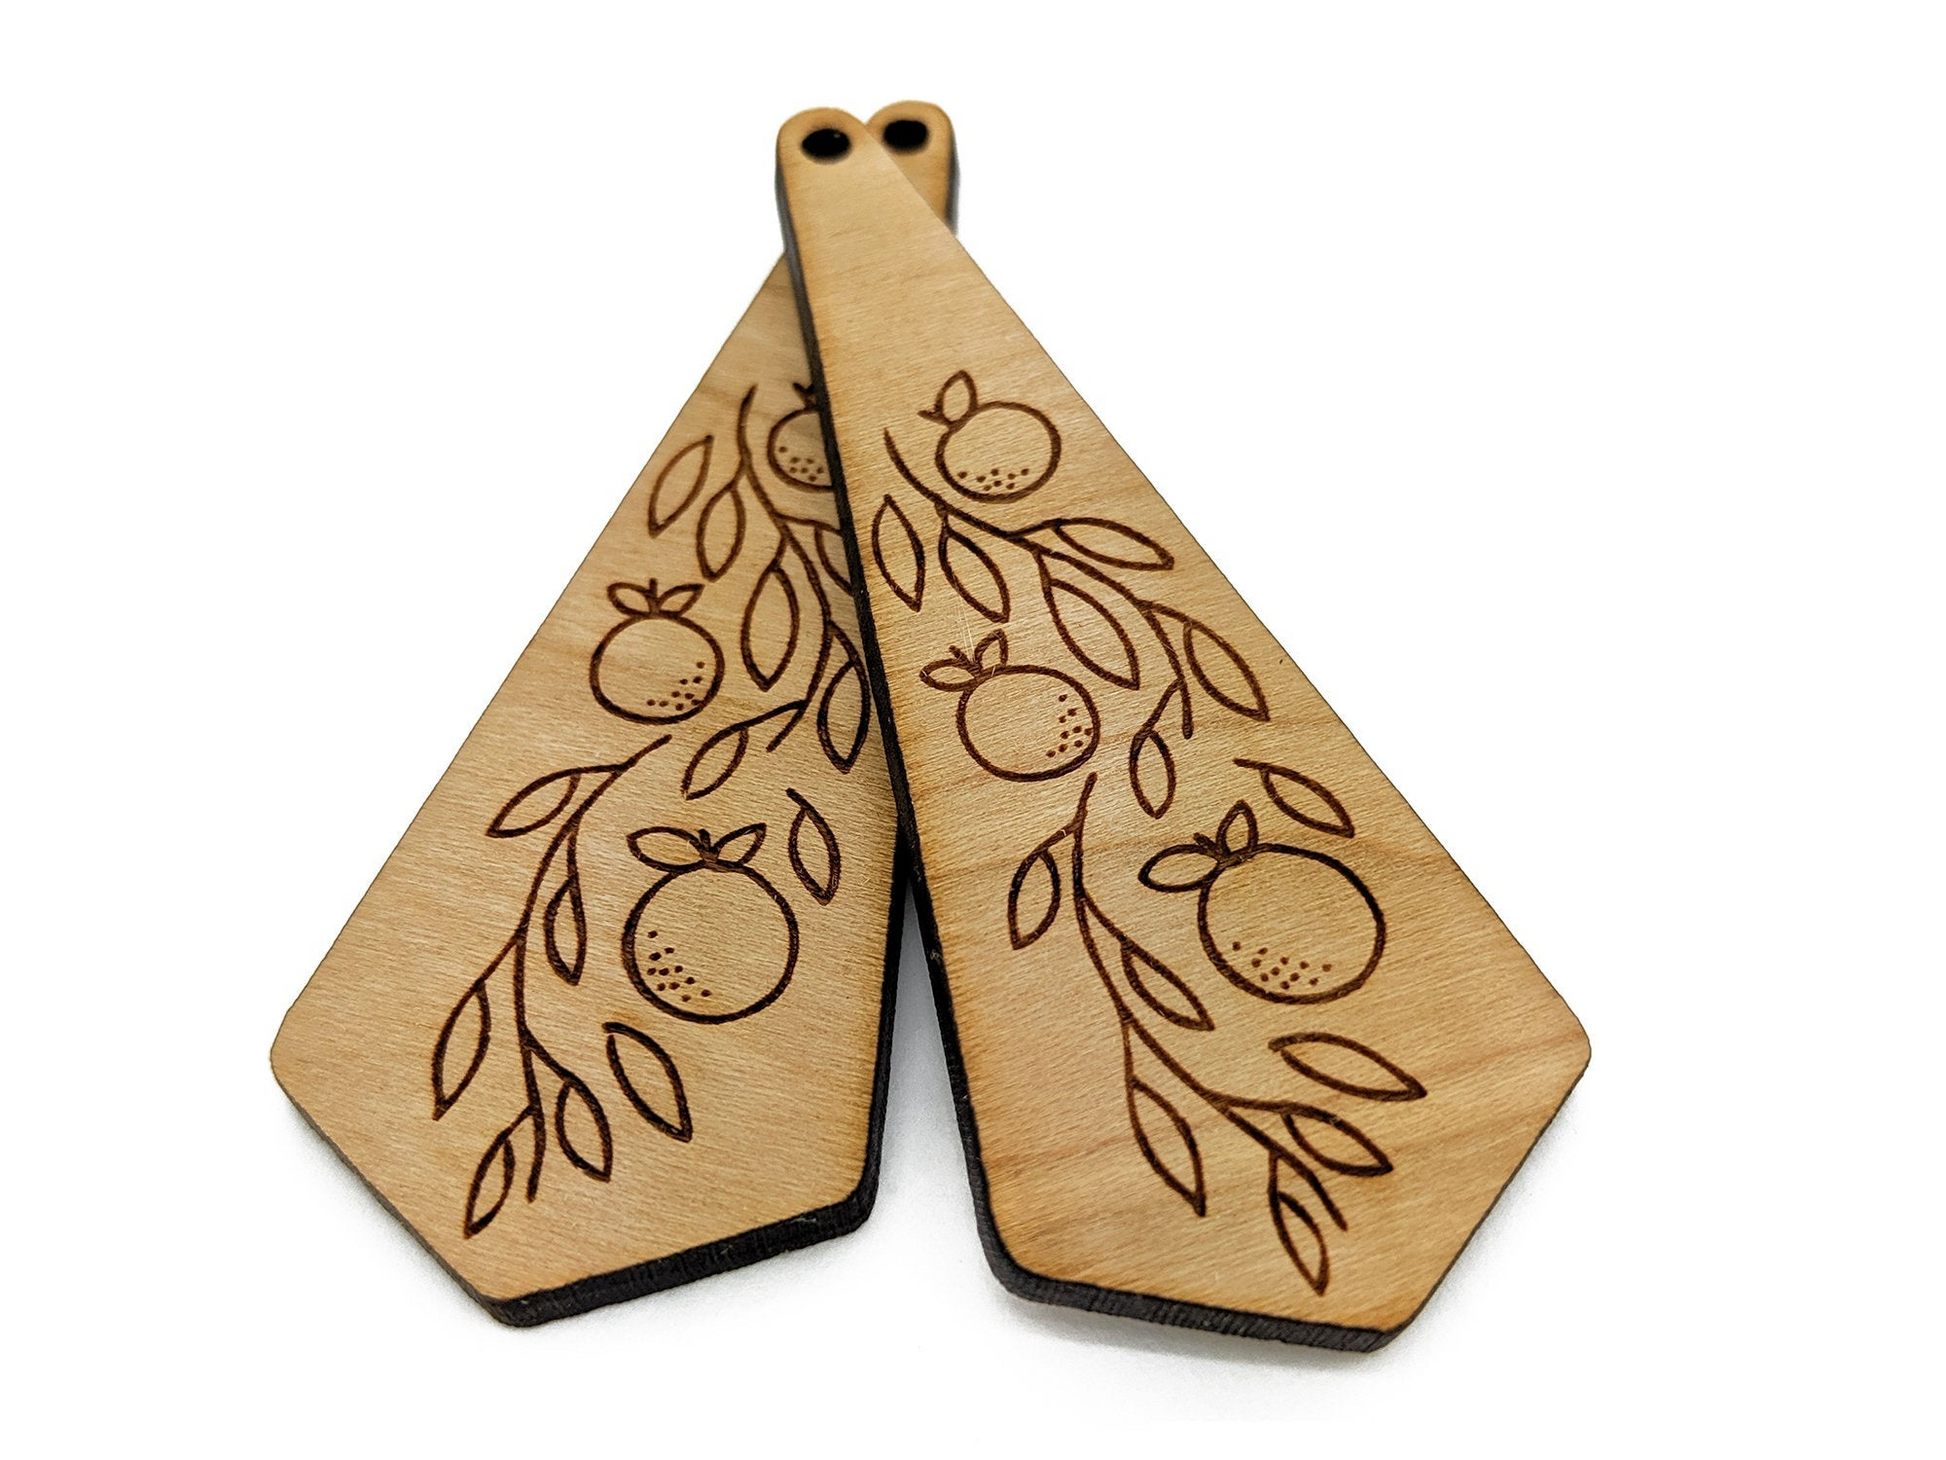 two wooden paddles with designs on them